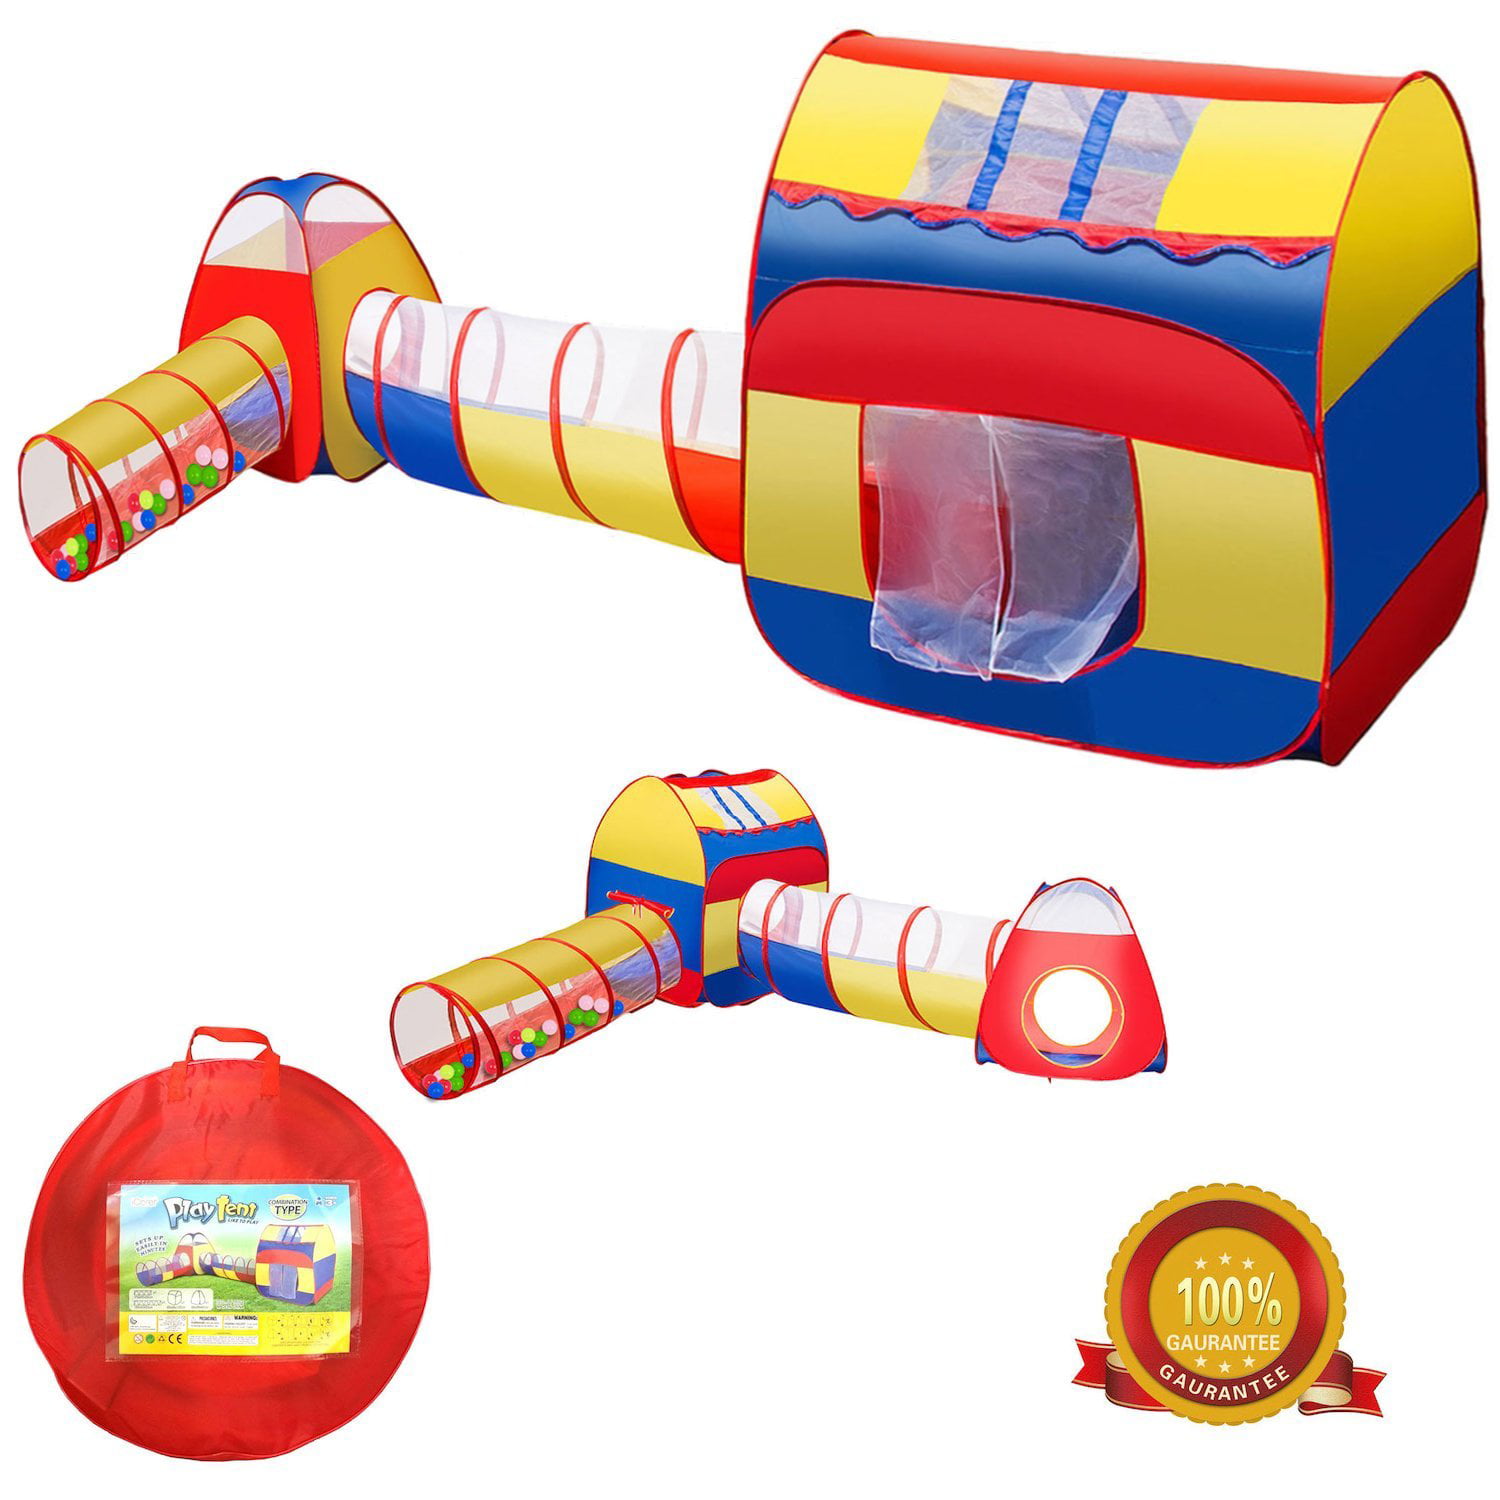 Children Play Tent Playz 4pc Pop up W 2 Crawl Tunnel Tents Kids for Boys Ball for sale online 